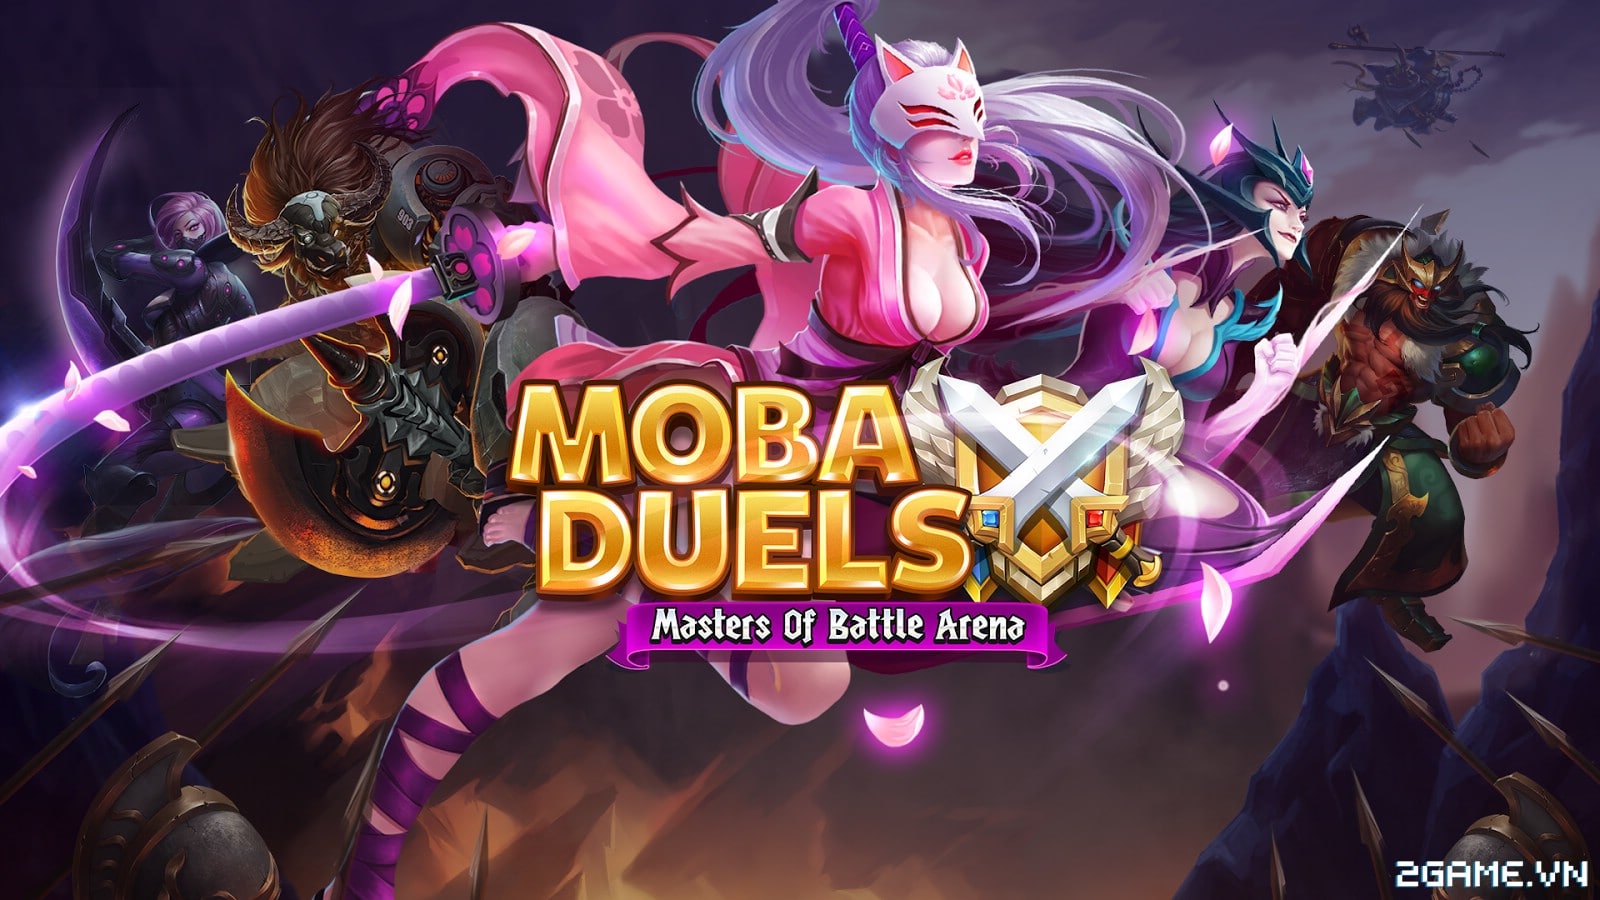 2game-Masters-Of-Battle-Arena-mobile-4.jpg (1600×900)